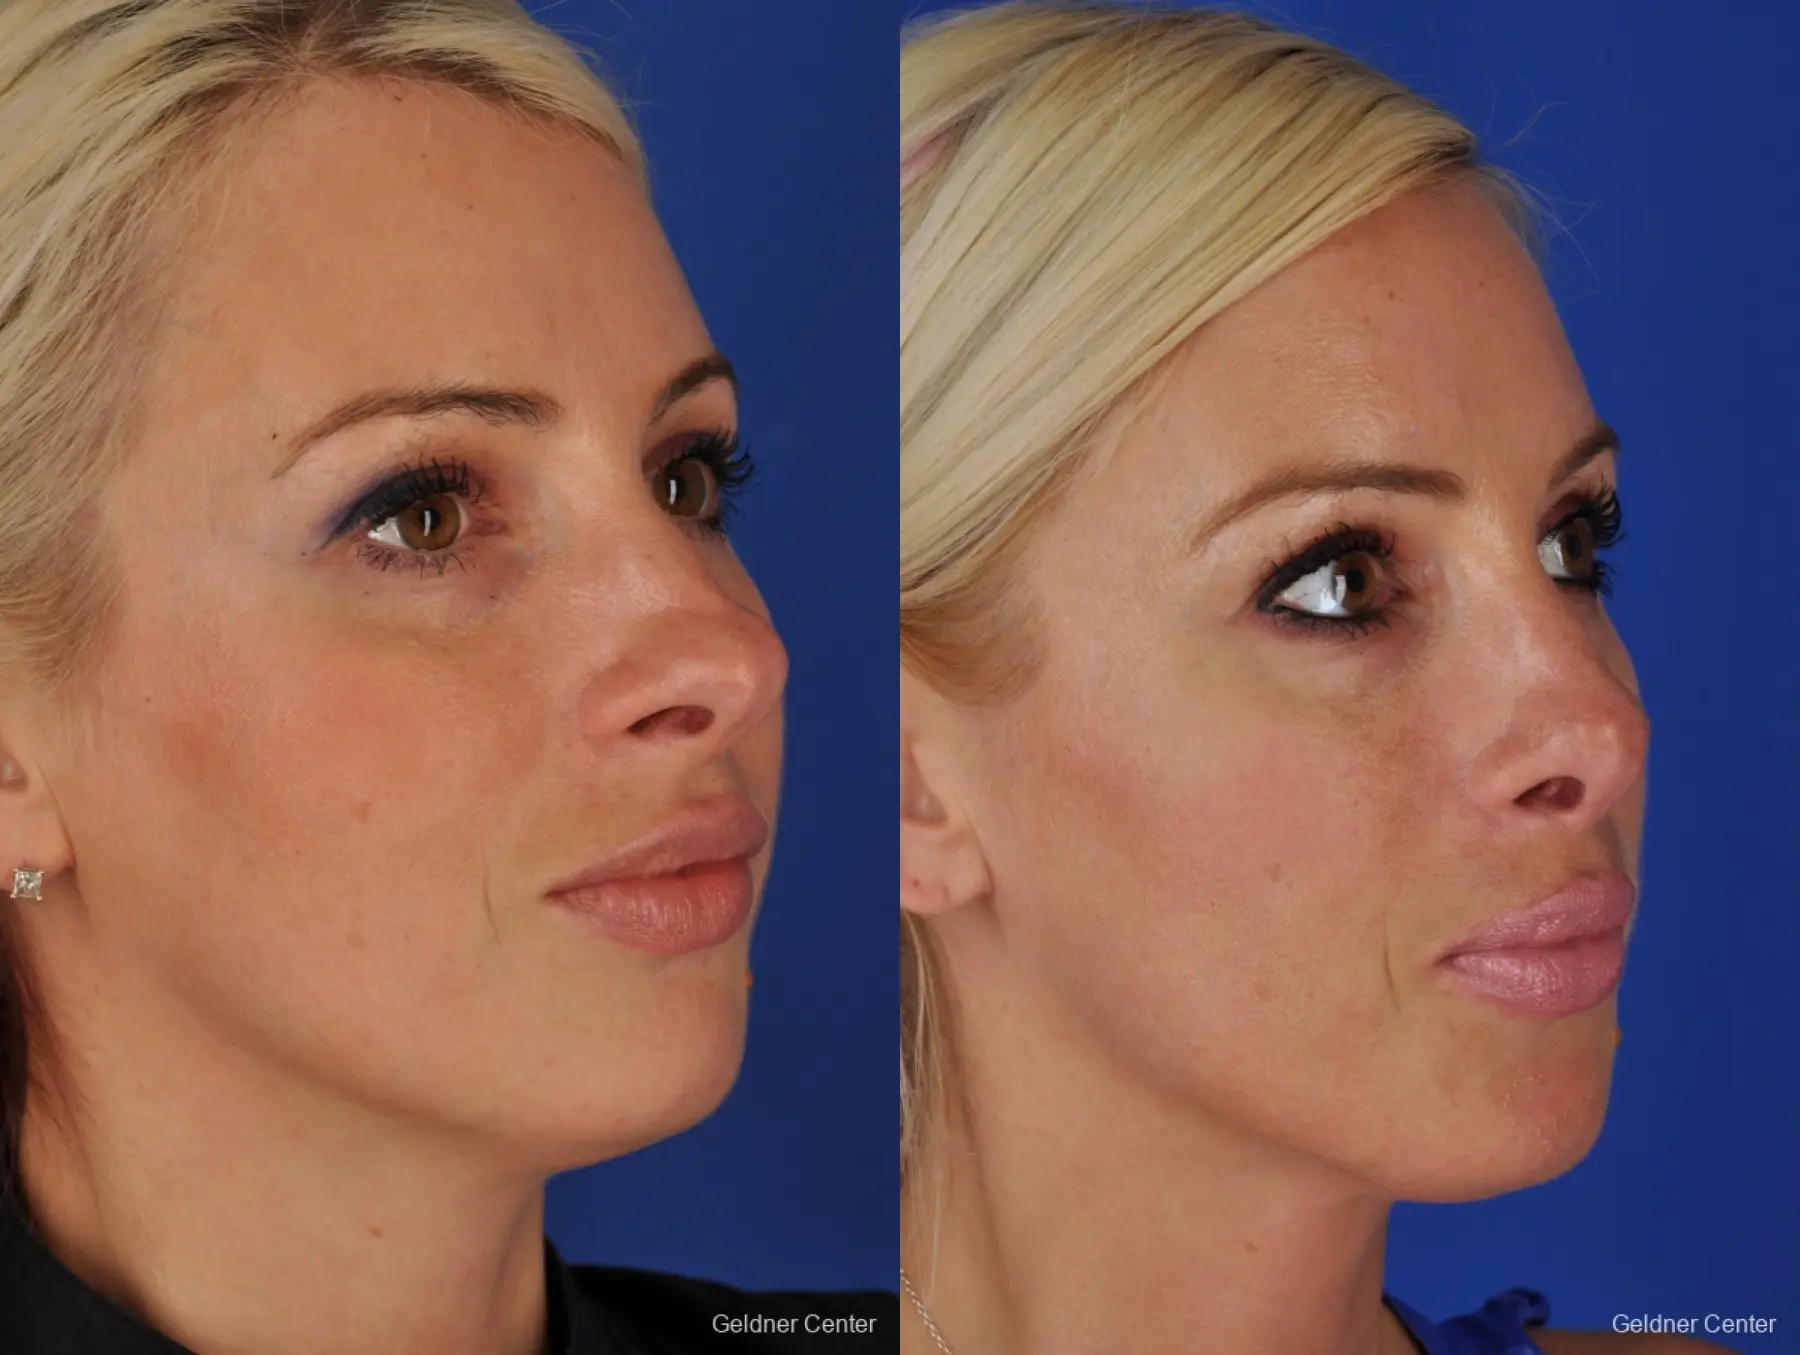 Chicago Rhinoplasty - Before and After 3